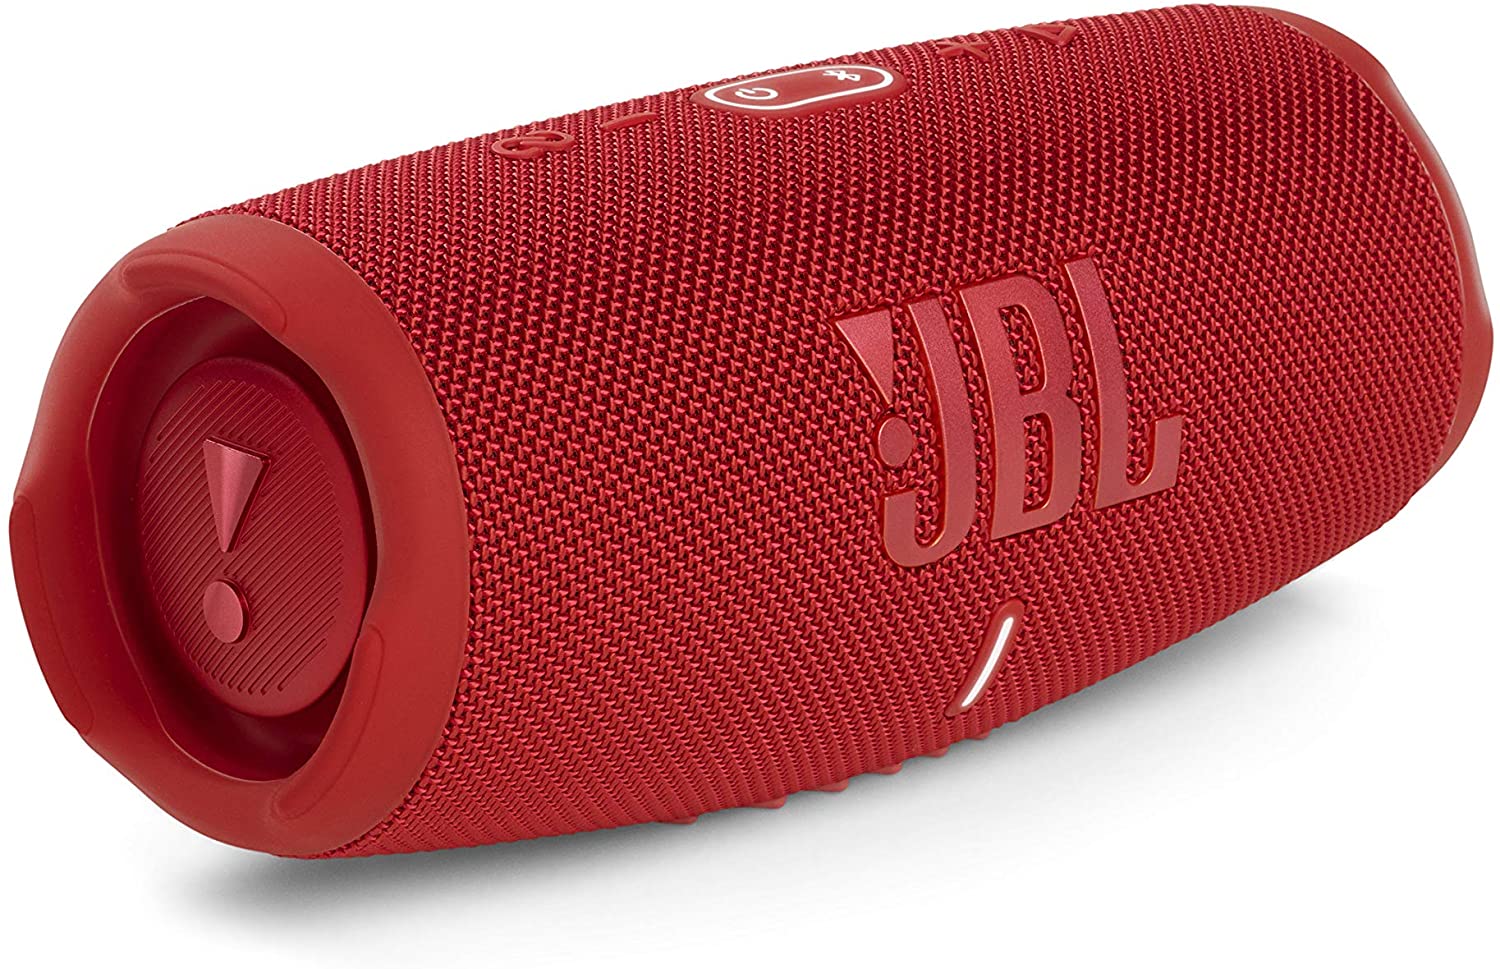  JBL Xtreme 3 - Portable Bluetooth Speaker, powerful sound and  deep bass, IP67 waterproof, 15 hours of playtime, powerbank, PartyBoost for  multi-speaker pairing (Blue) : Electronics